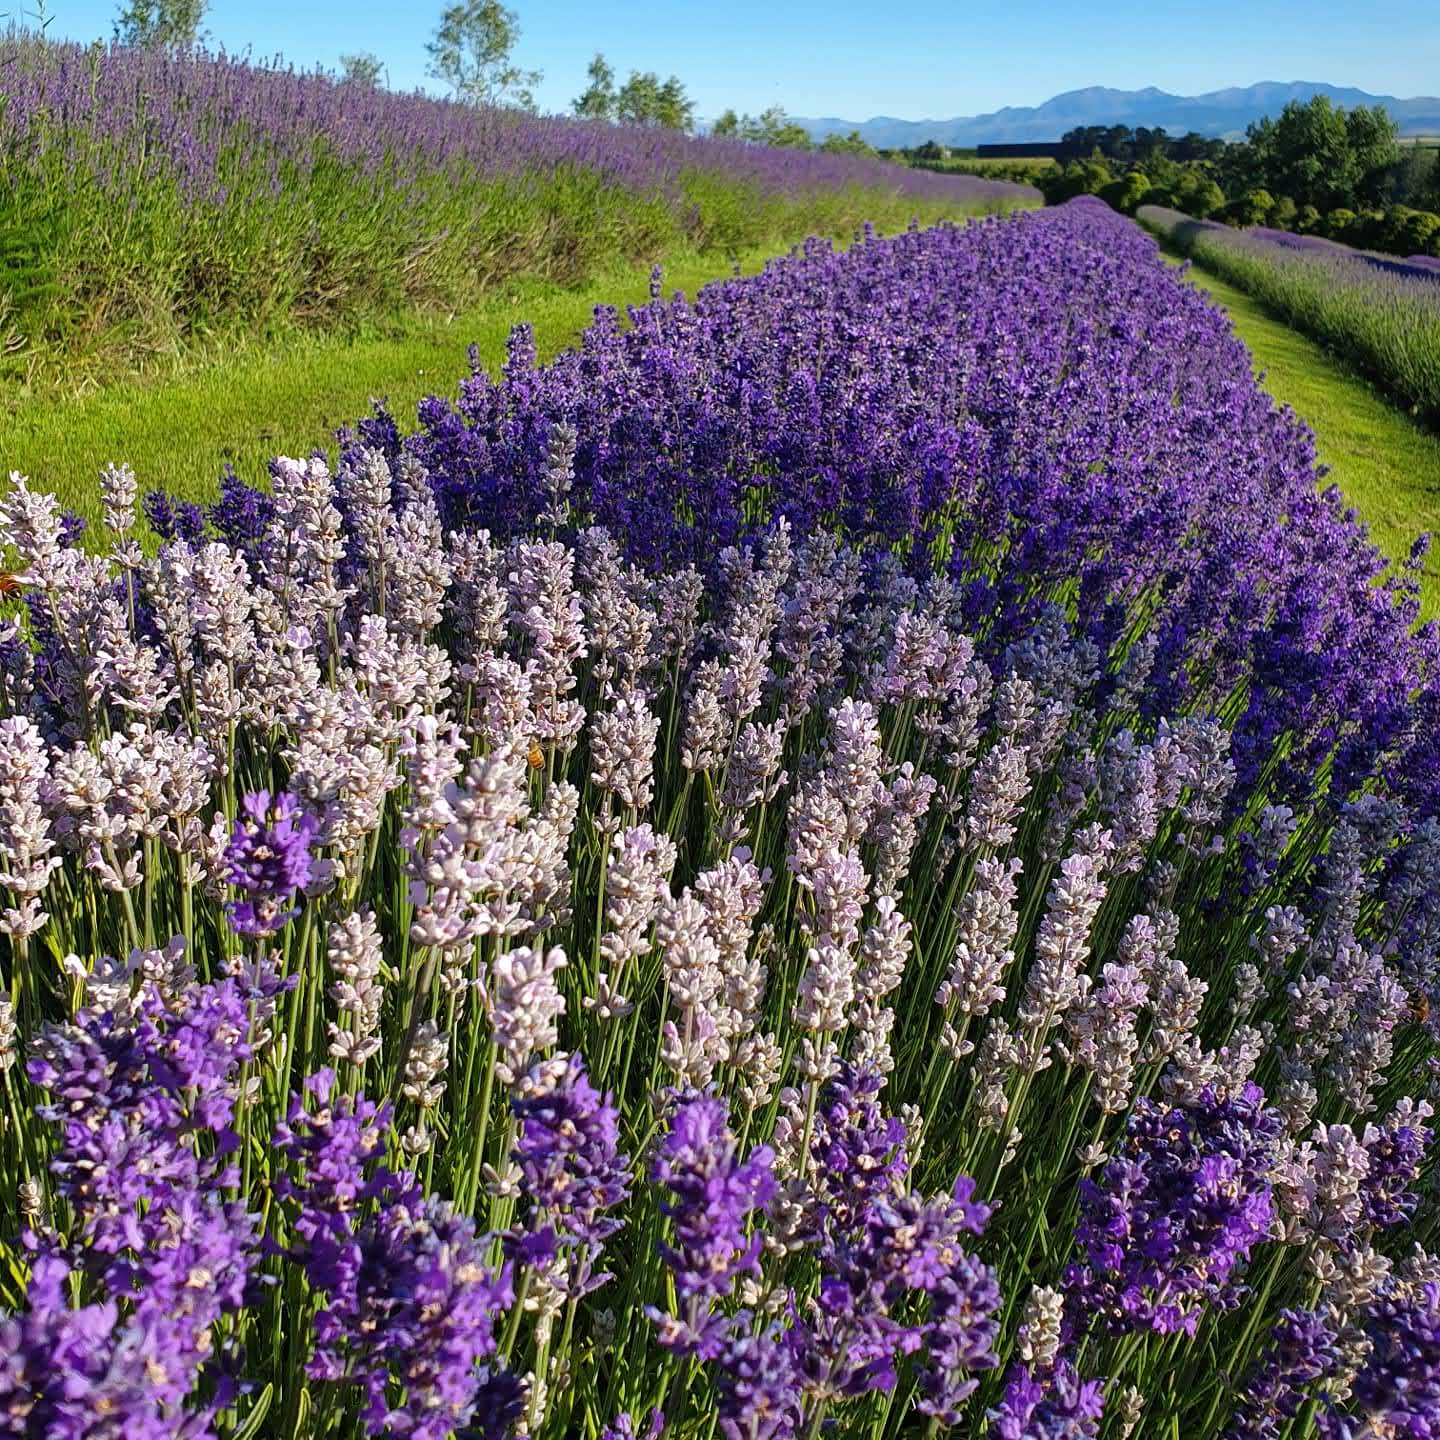 Load video: This is Limestone Valley Estate, our lavender, truffle and olive farm, in South Canterbury in New Zealand&#39;s South Island.  This is where we grow and harvest our lavender by hand and produce our own lavender essential oils. We use these in our range of quality, natural lavender products. Locals can stop by our shop, or can come and stay in our beautiful American barn farmstay with stunning views of our sculpture gardens and the mountains beyond - https://airbnb.com/h/limestonevalleyestate